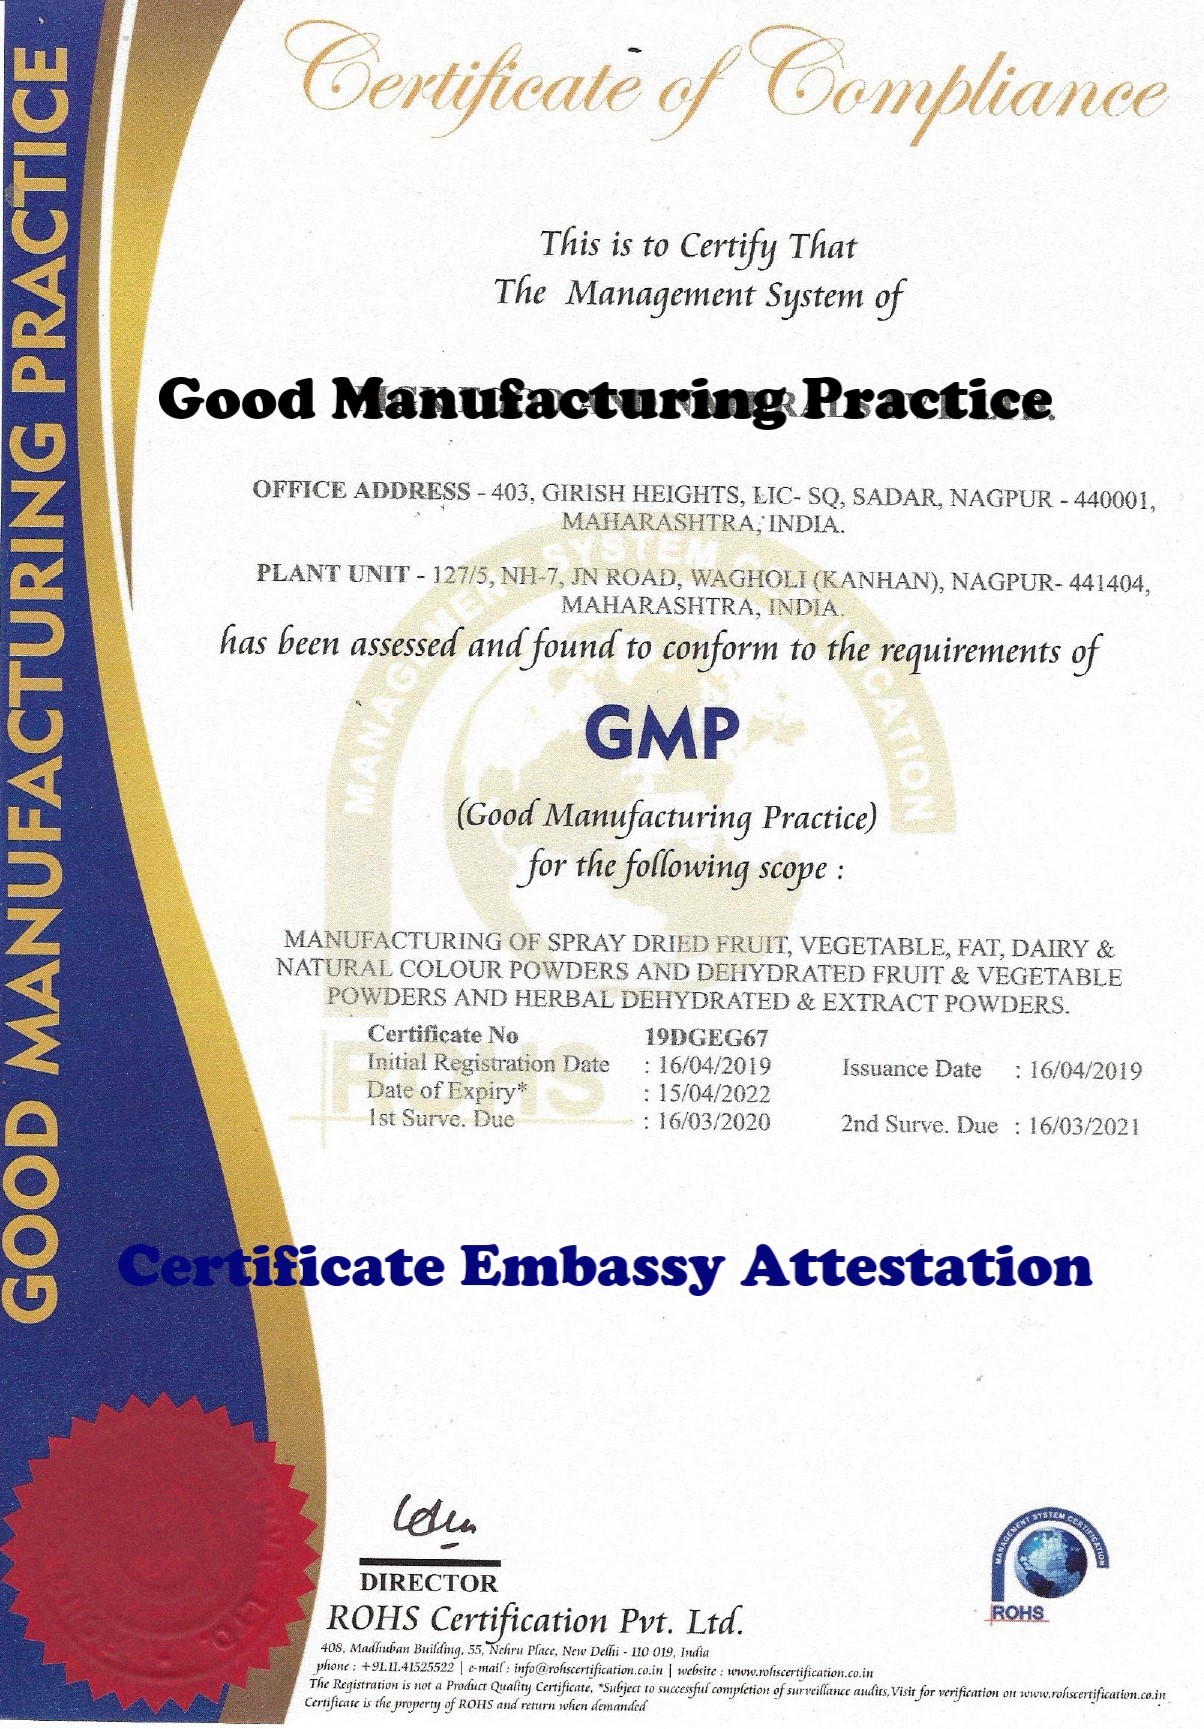 GMP Certificate Attestation from Madagascar Embassy